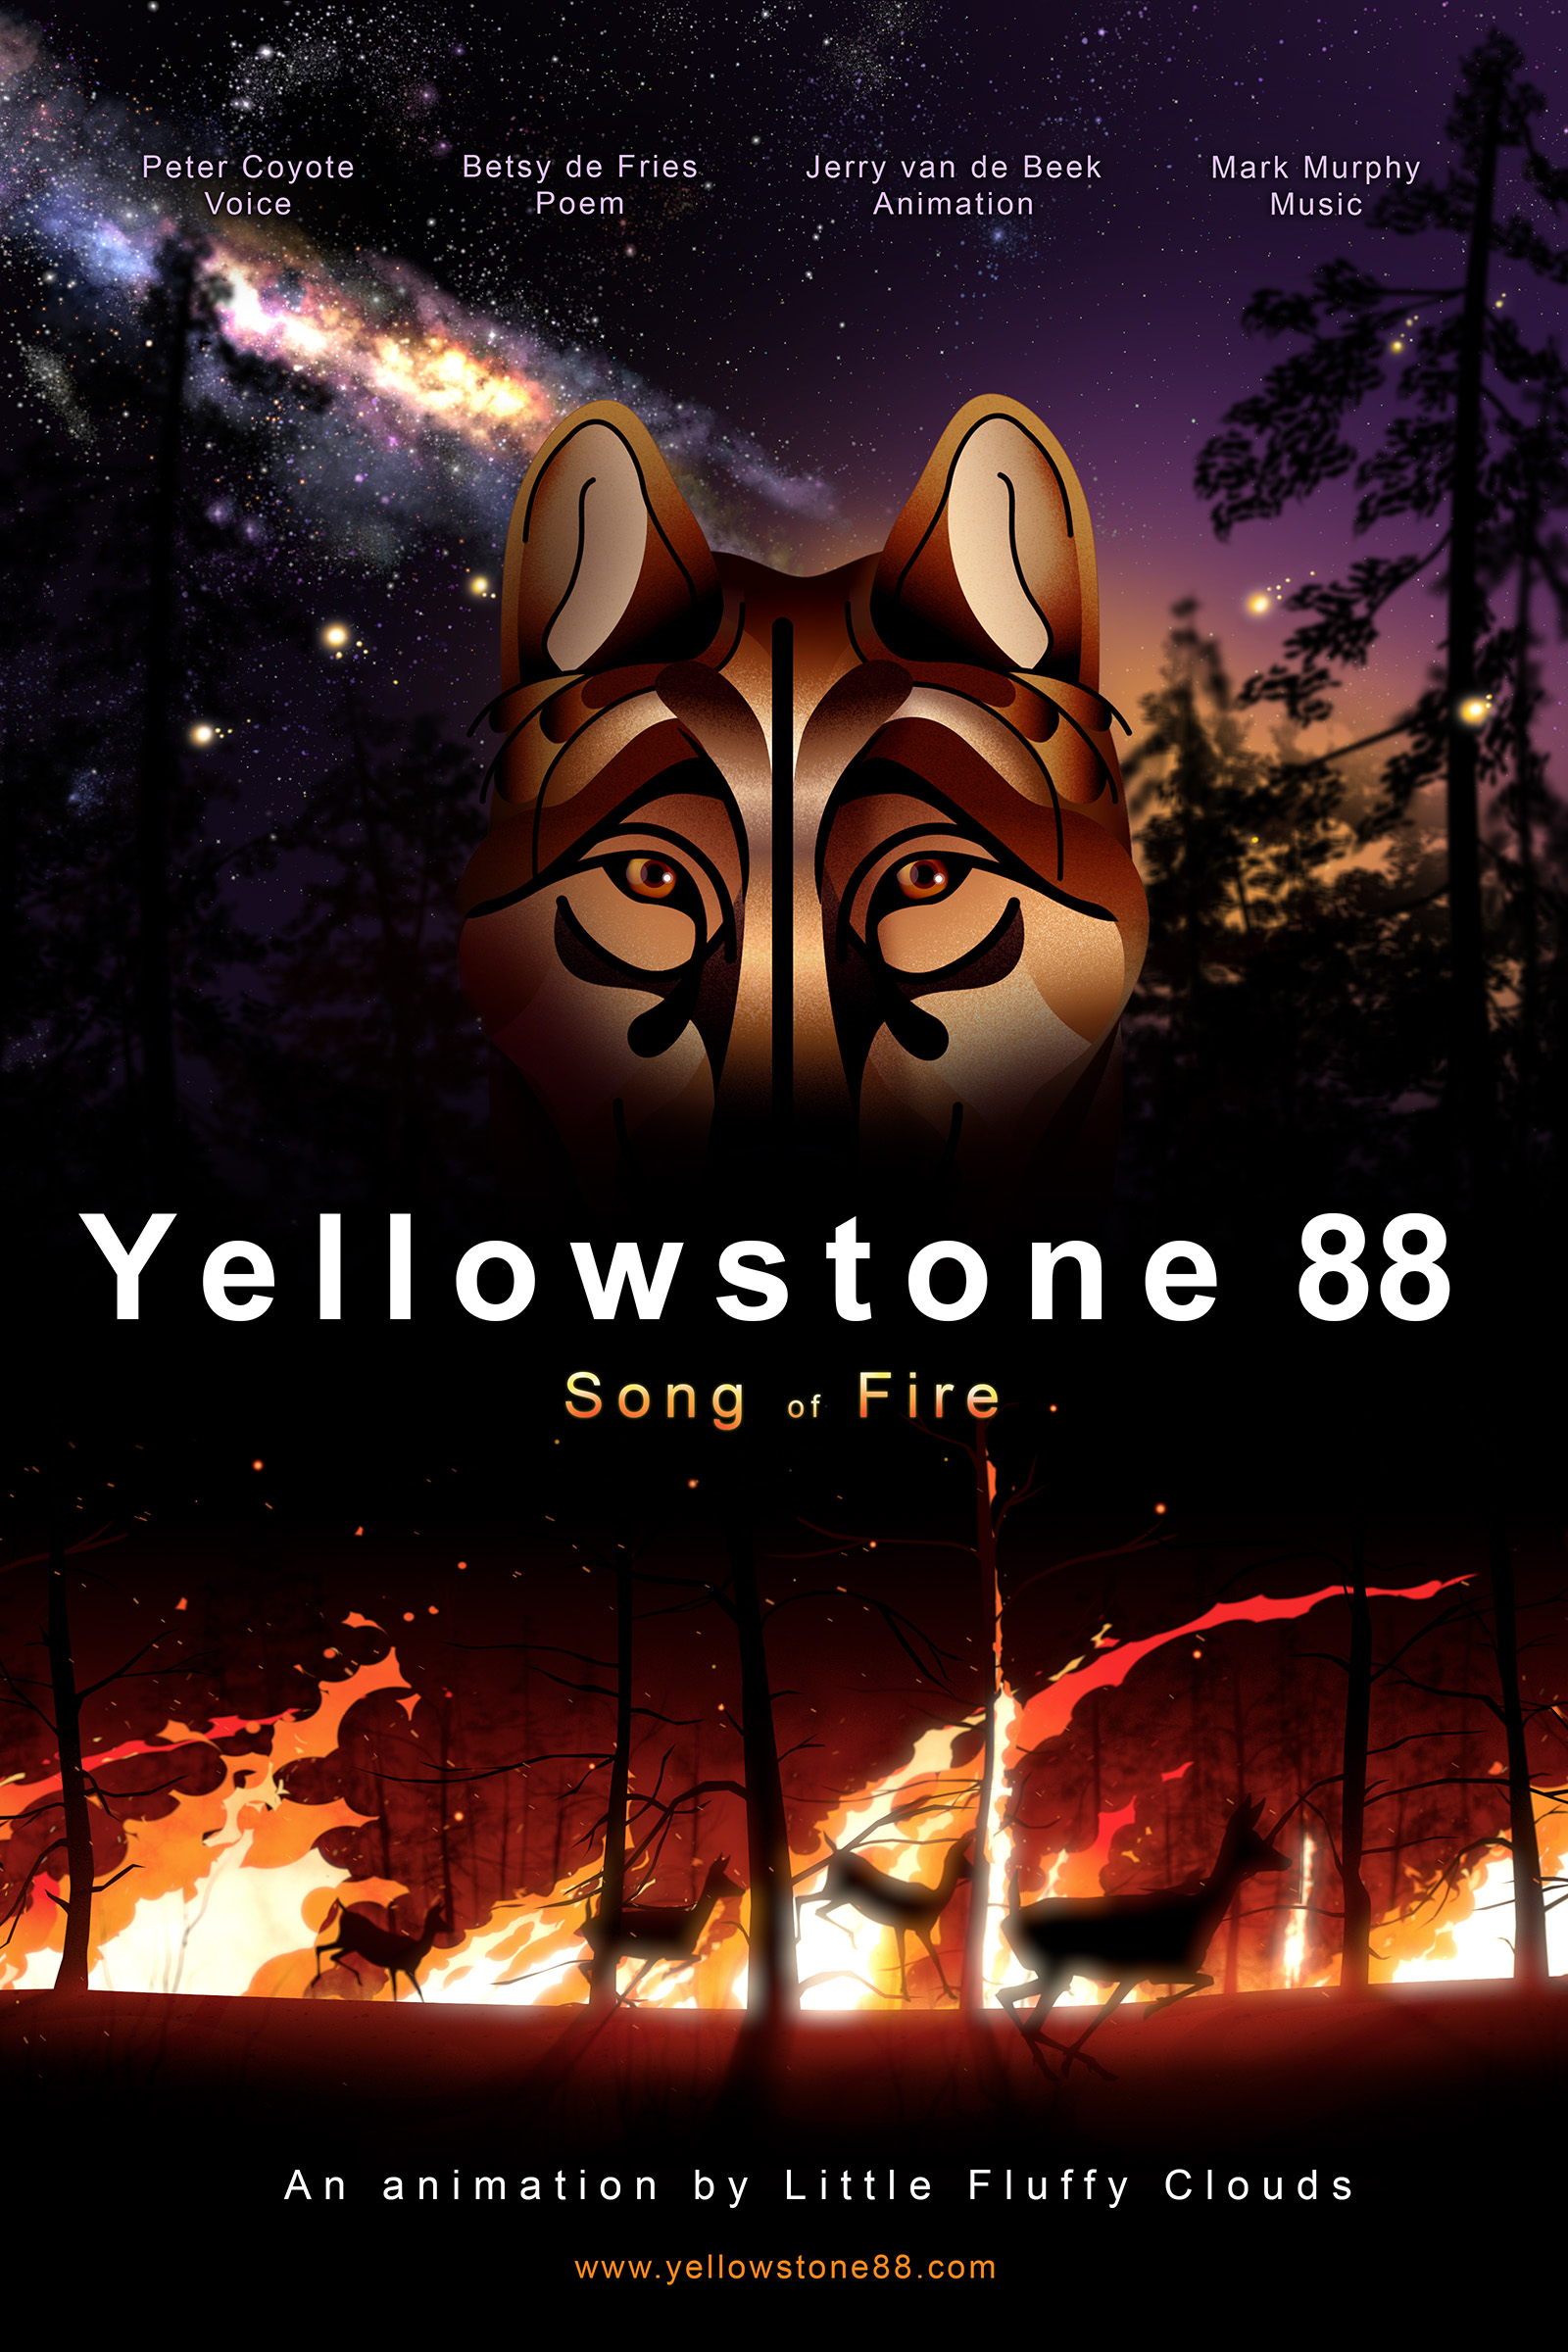 Yellowstone 88 Song of Fire | an multi award winning video by Little Fluffy Clouds a San Francisco - Bay Area Animation Studio